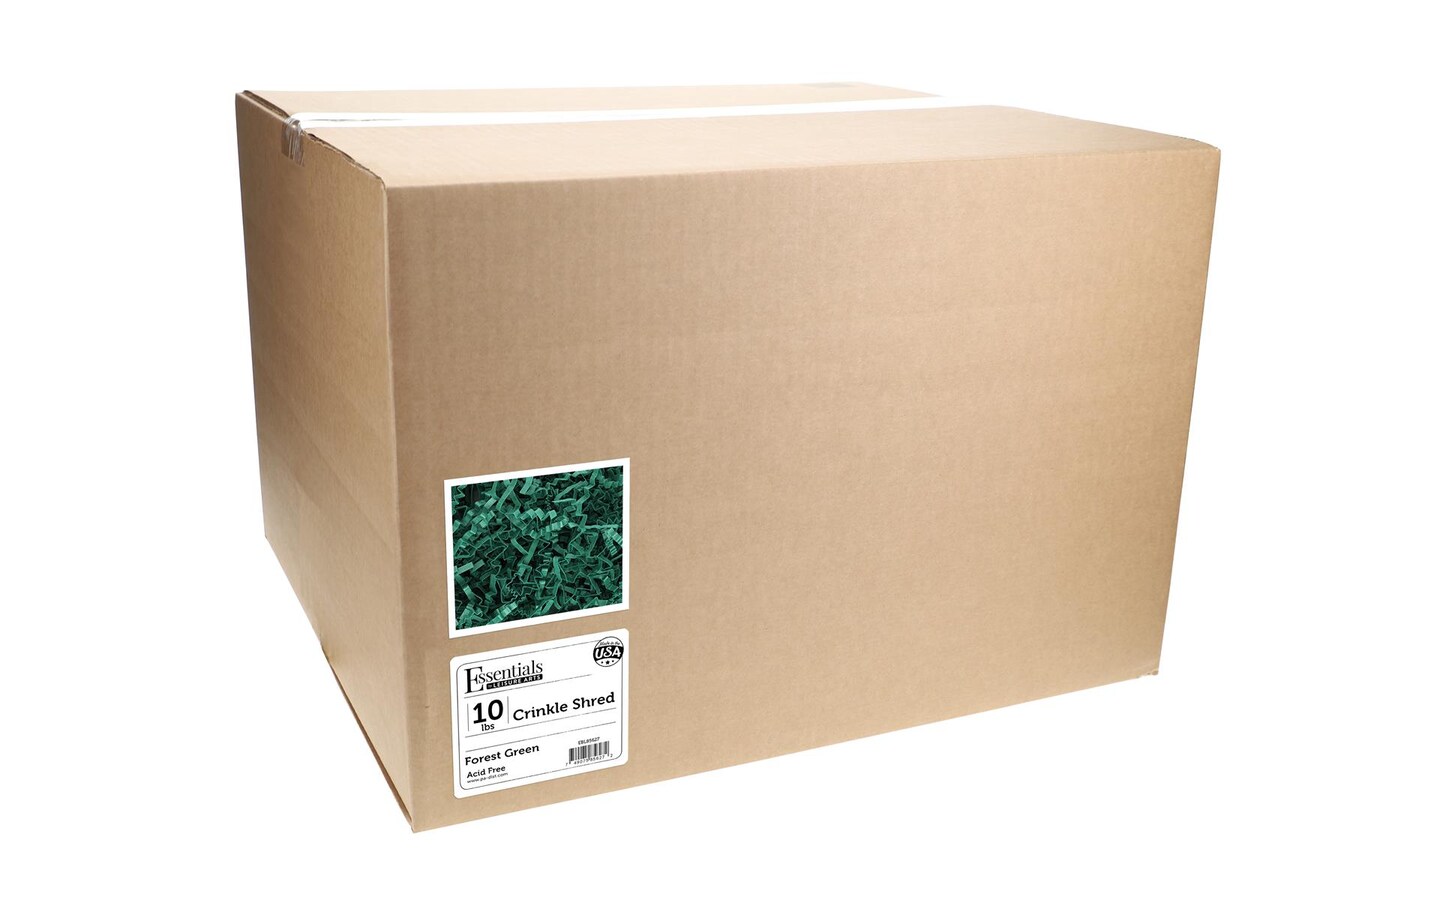 Essentials by Leisure Arts Crinkle Shred Box, Forest Green, 10lbs Shredded Paper Filler, Crinkle Cut Paper Shred Filler, Box Filler, Shredded Paper for Gift Box, Paper Crinkle Filler, Box Filling